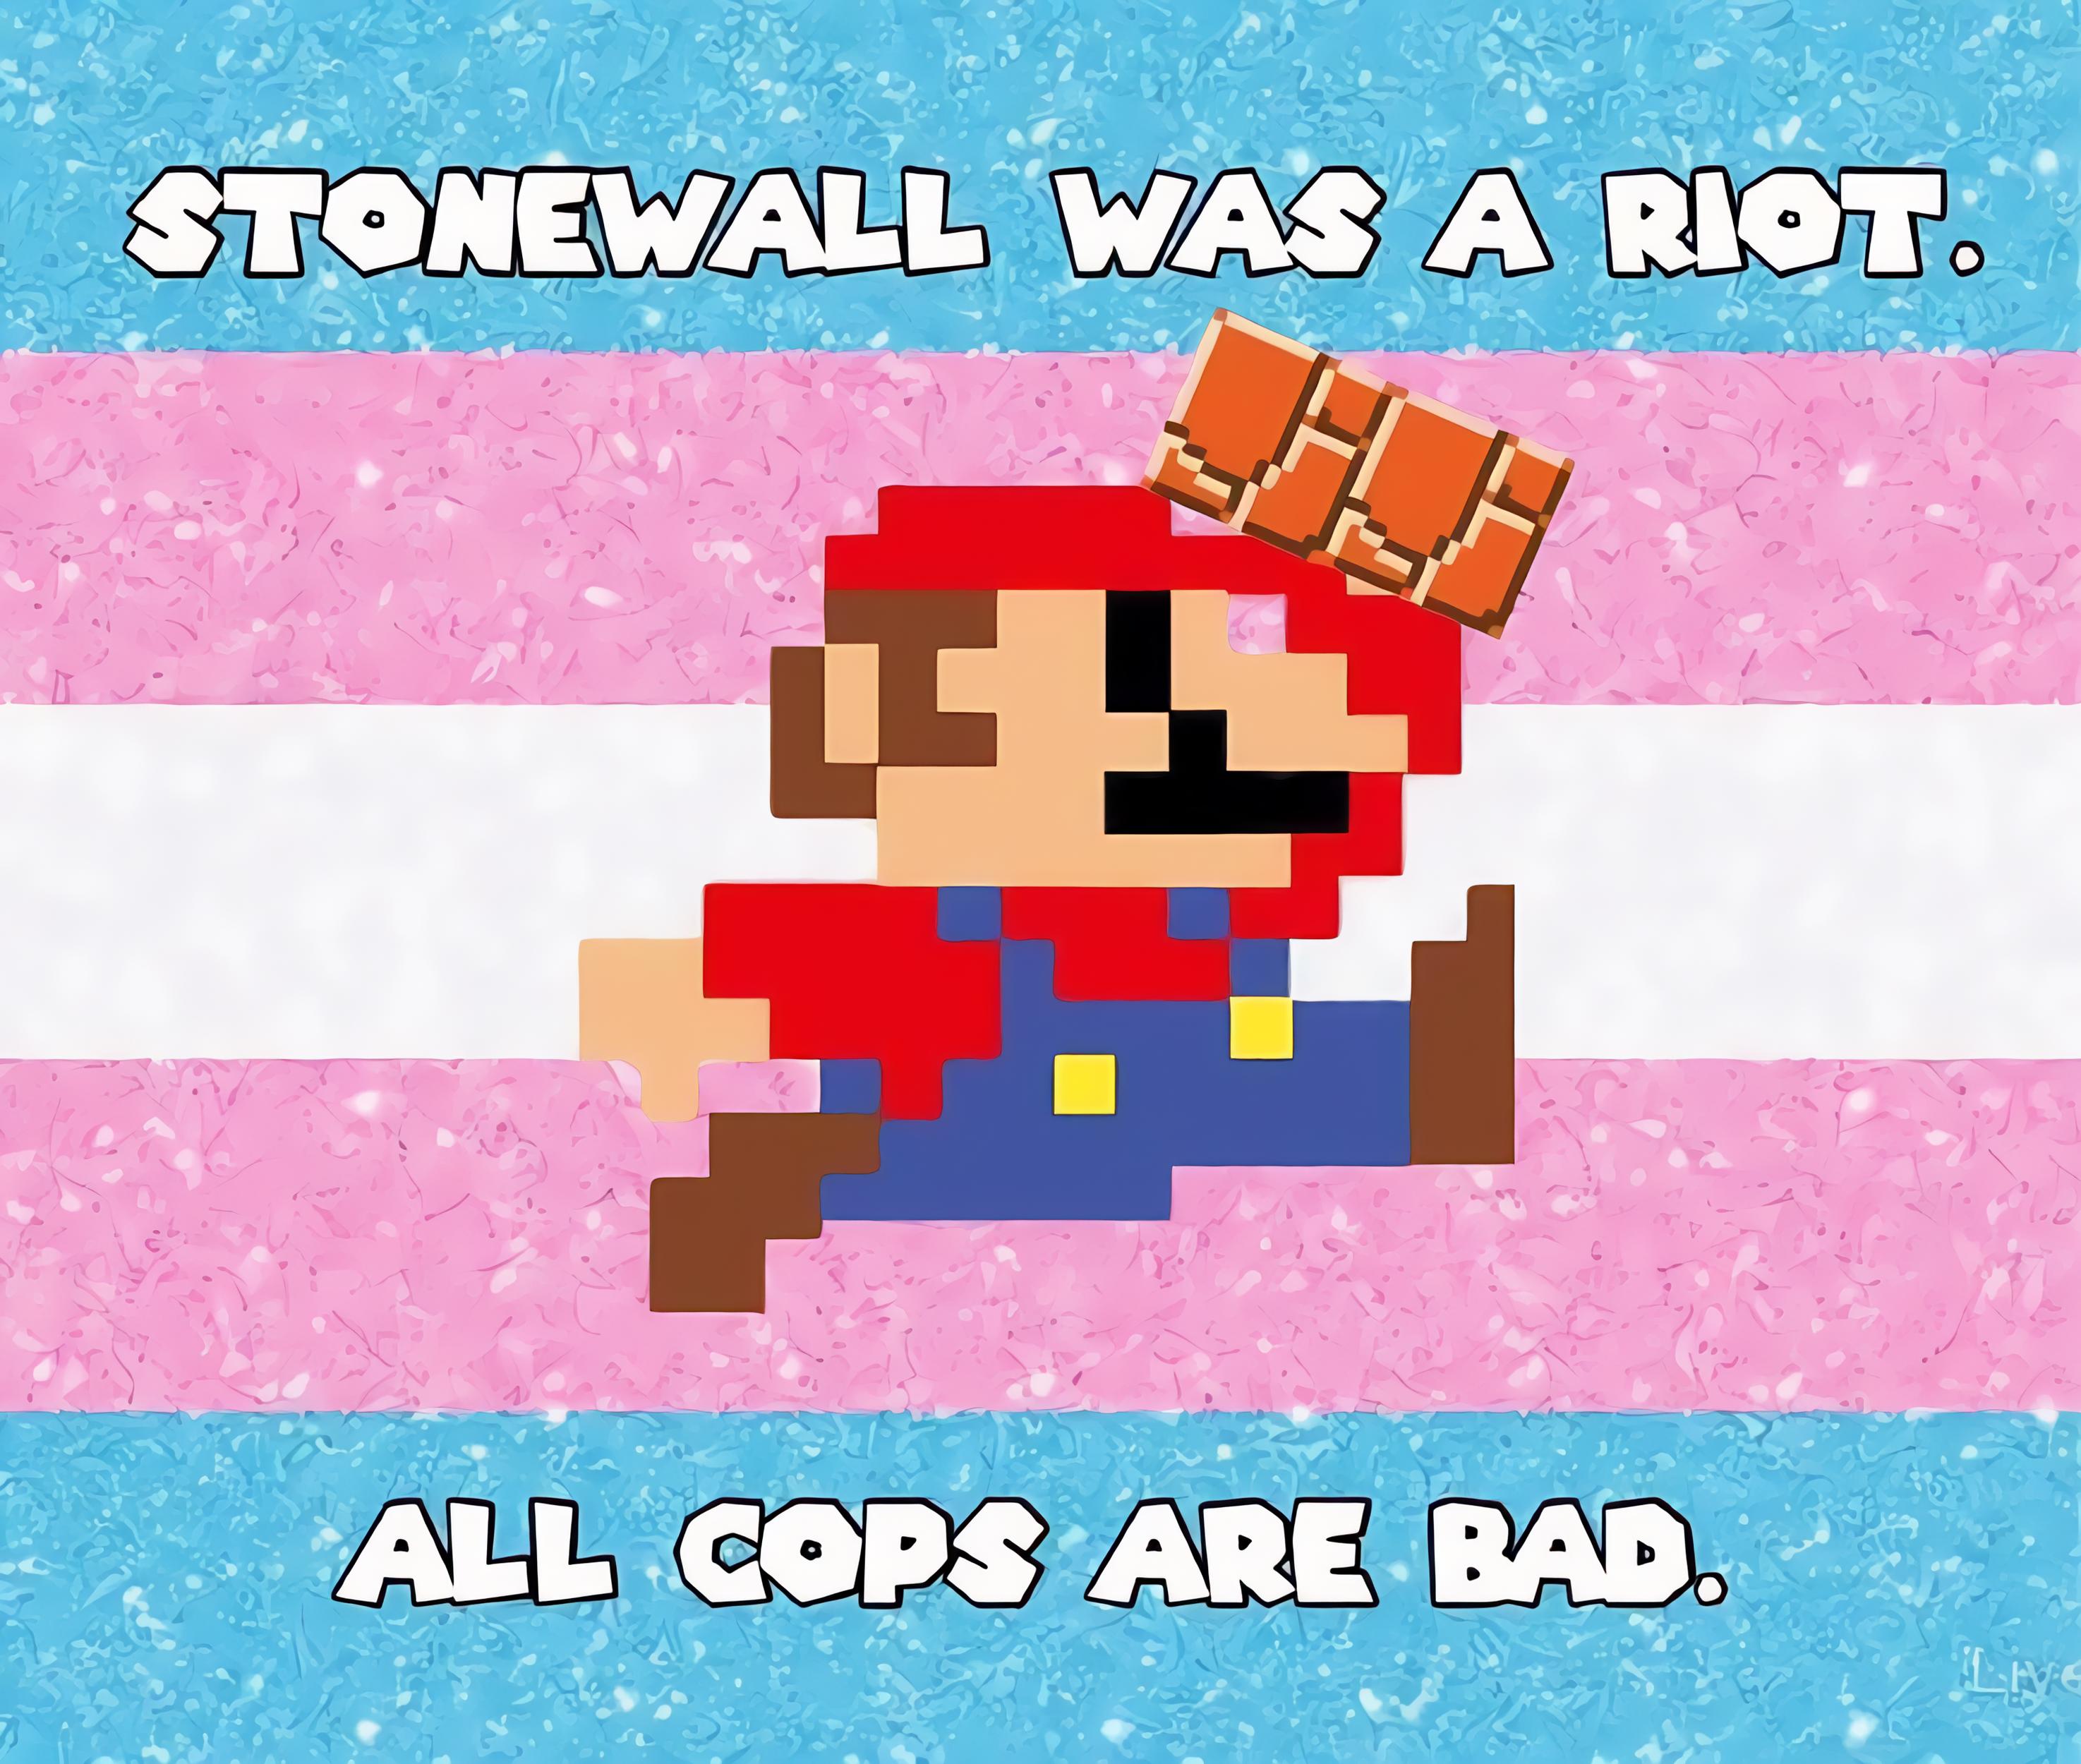 Stonewall was a riot, all cops are bad